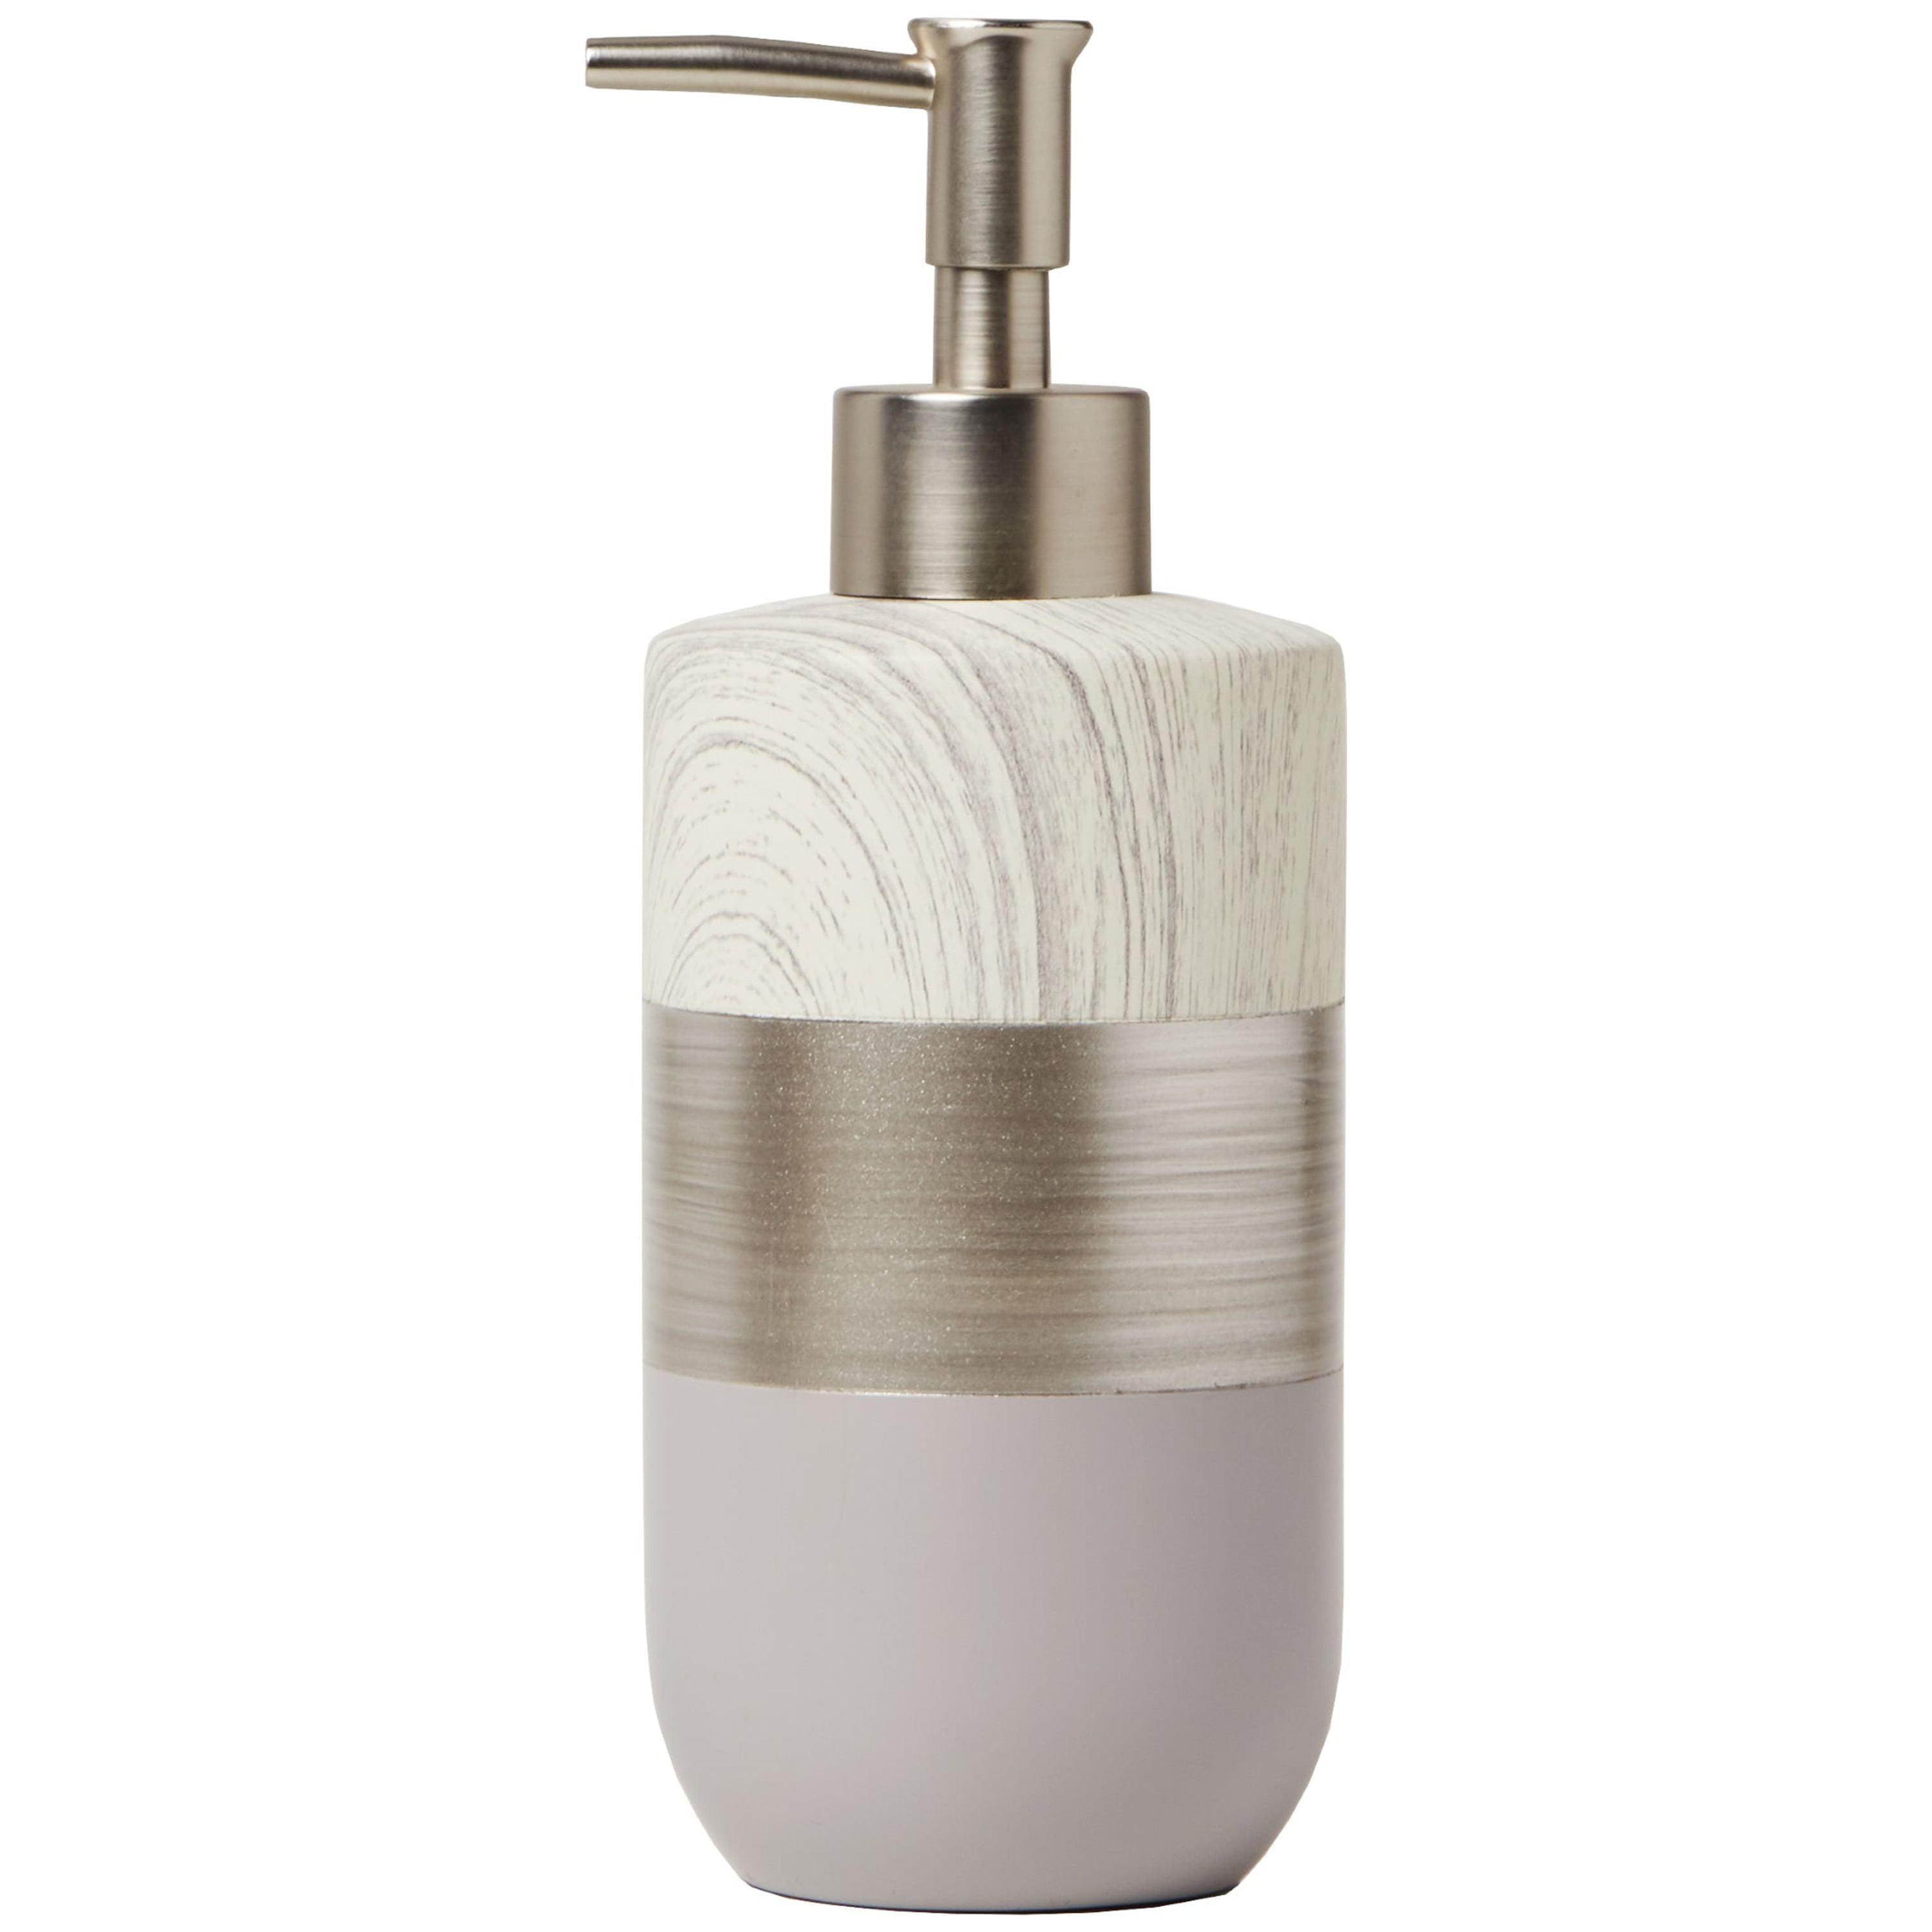 Liselotte Brushed Silver and Soft Gray Resin Lotion/Soap Dispenser